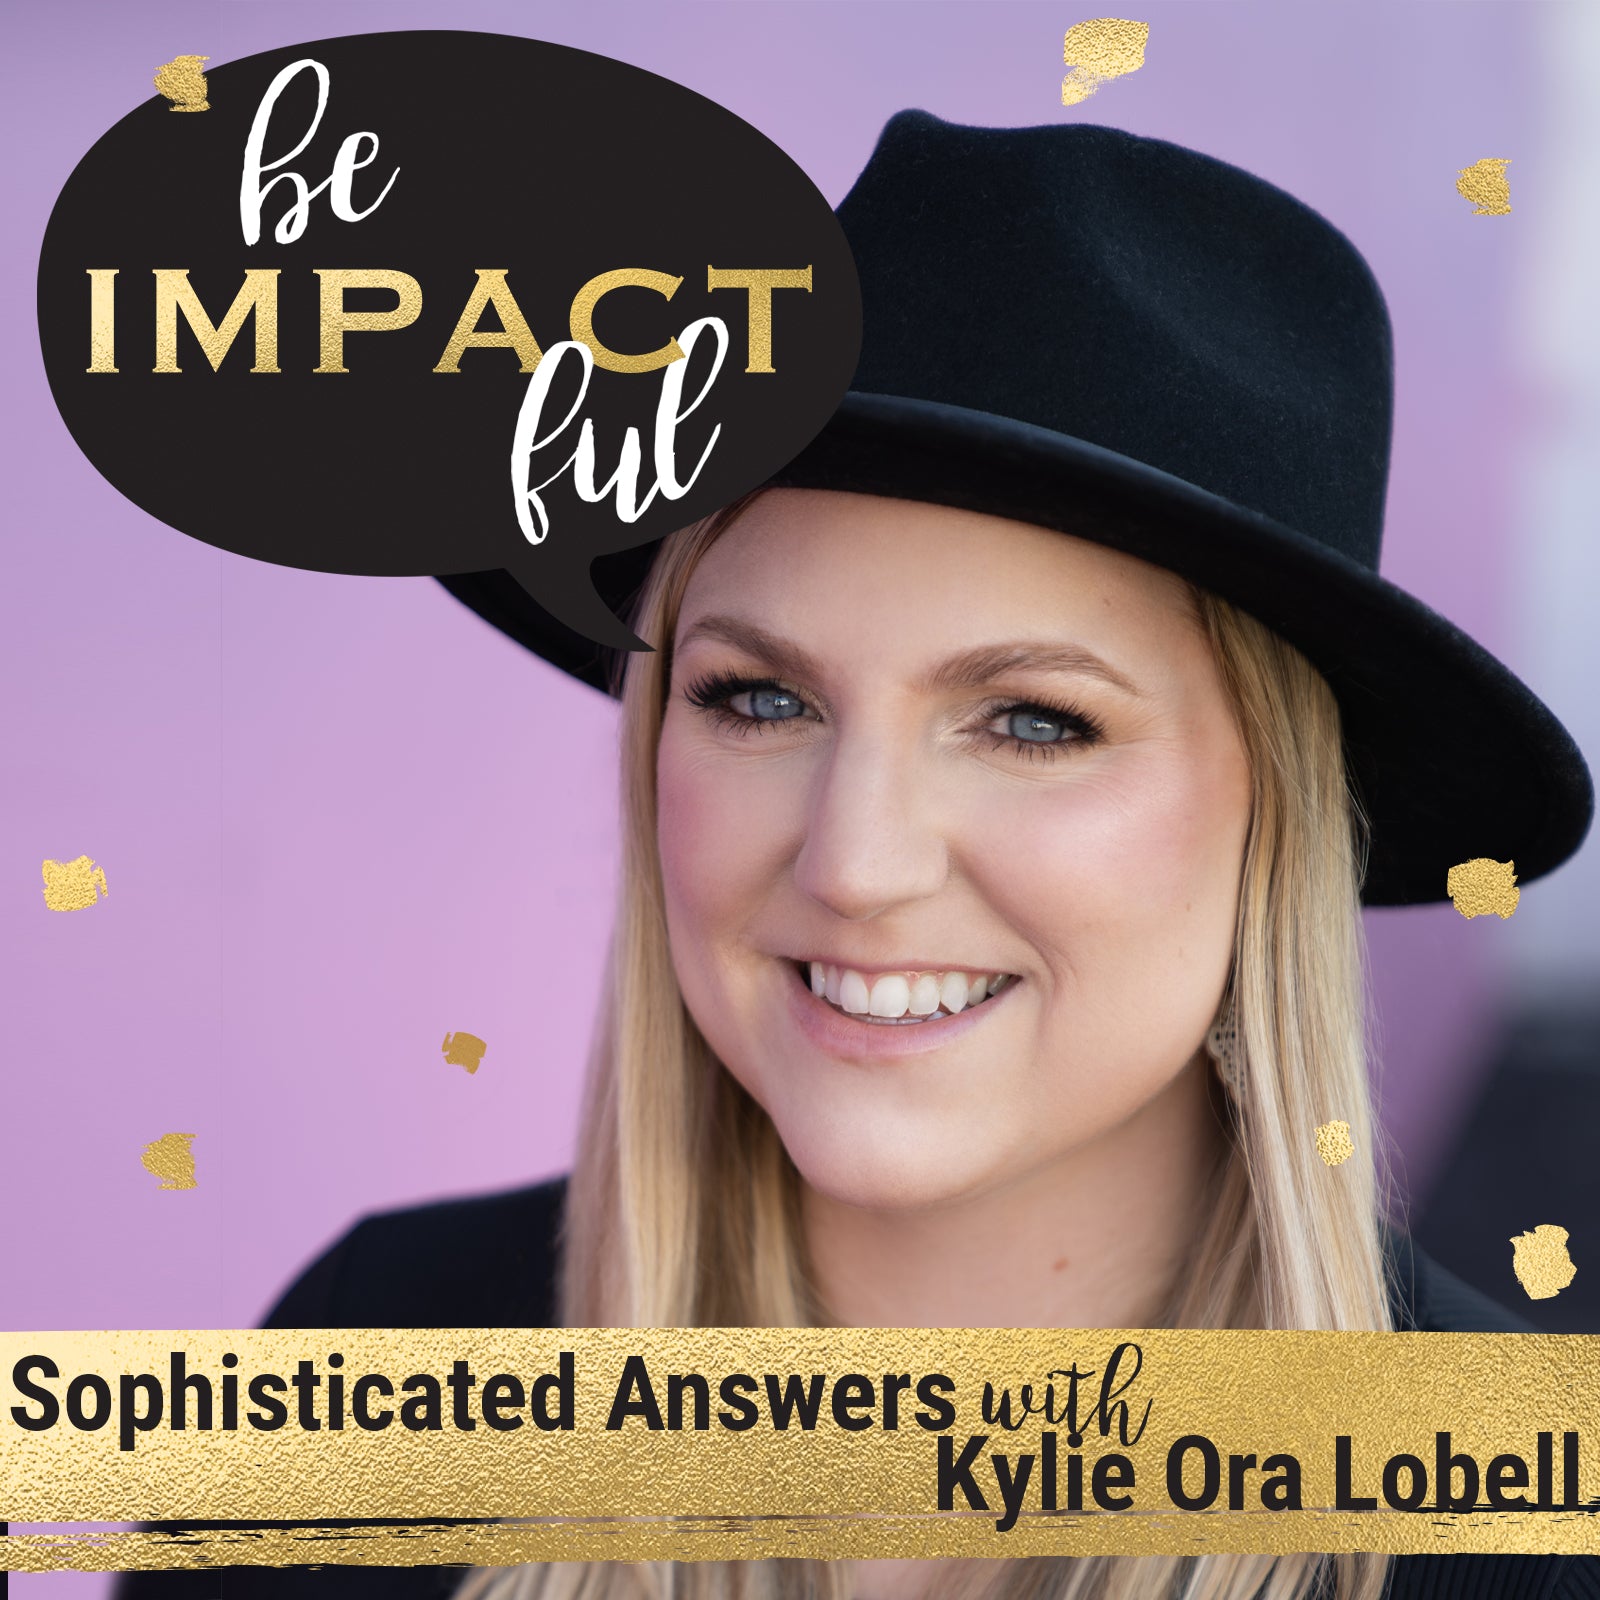 Sophisticated Answers with Kylie Ora Lobell